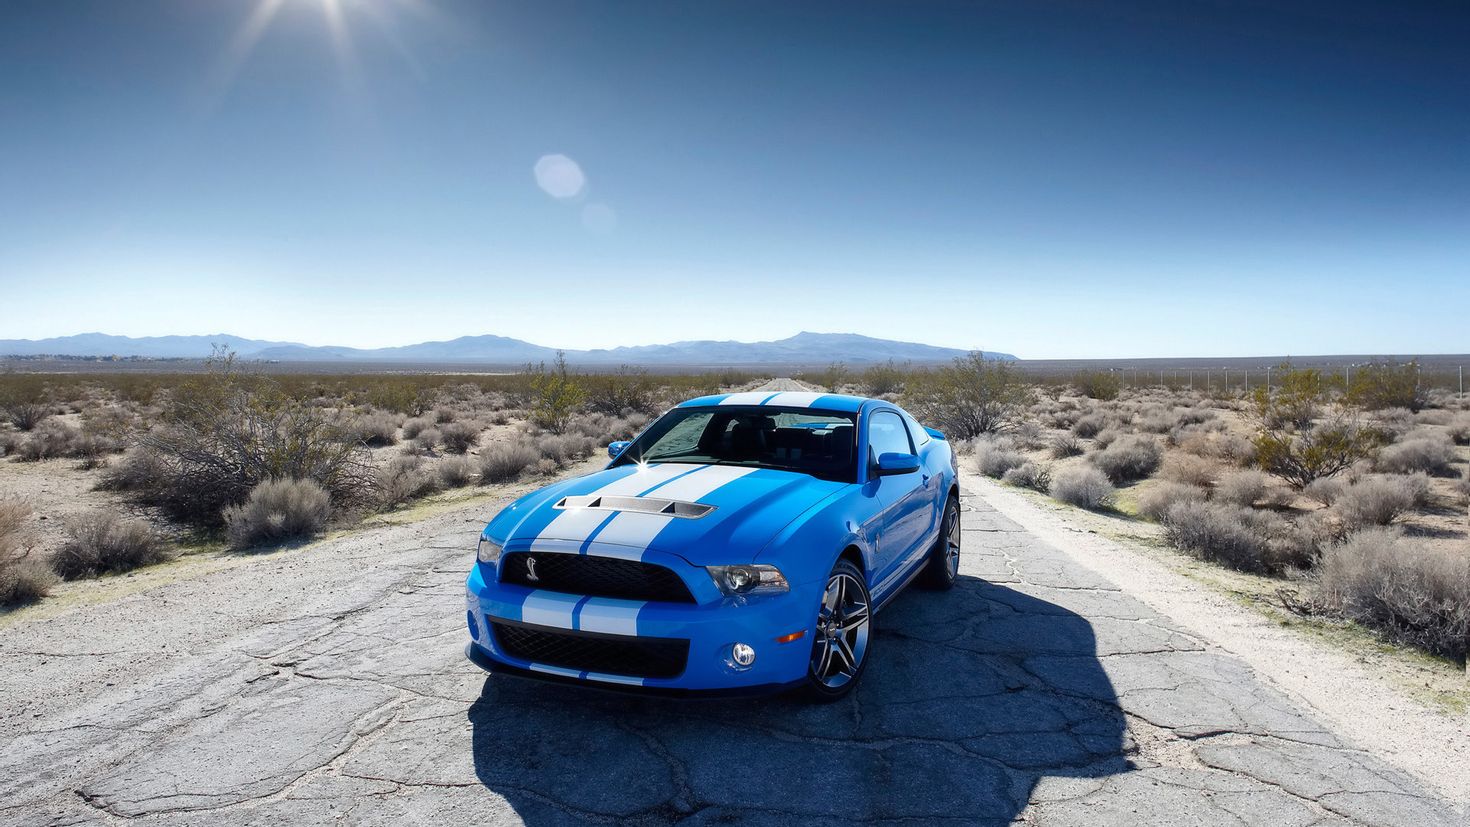 Ford Shelby gt500. Ford Mustang gt500. Форд Мустанг Шелби. Форд Мустанг gt 500 из Форсажа. Мустанг дорога